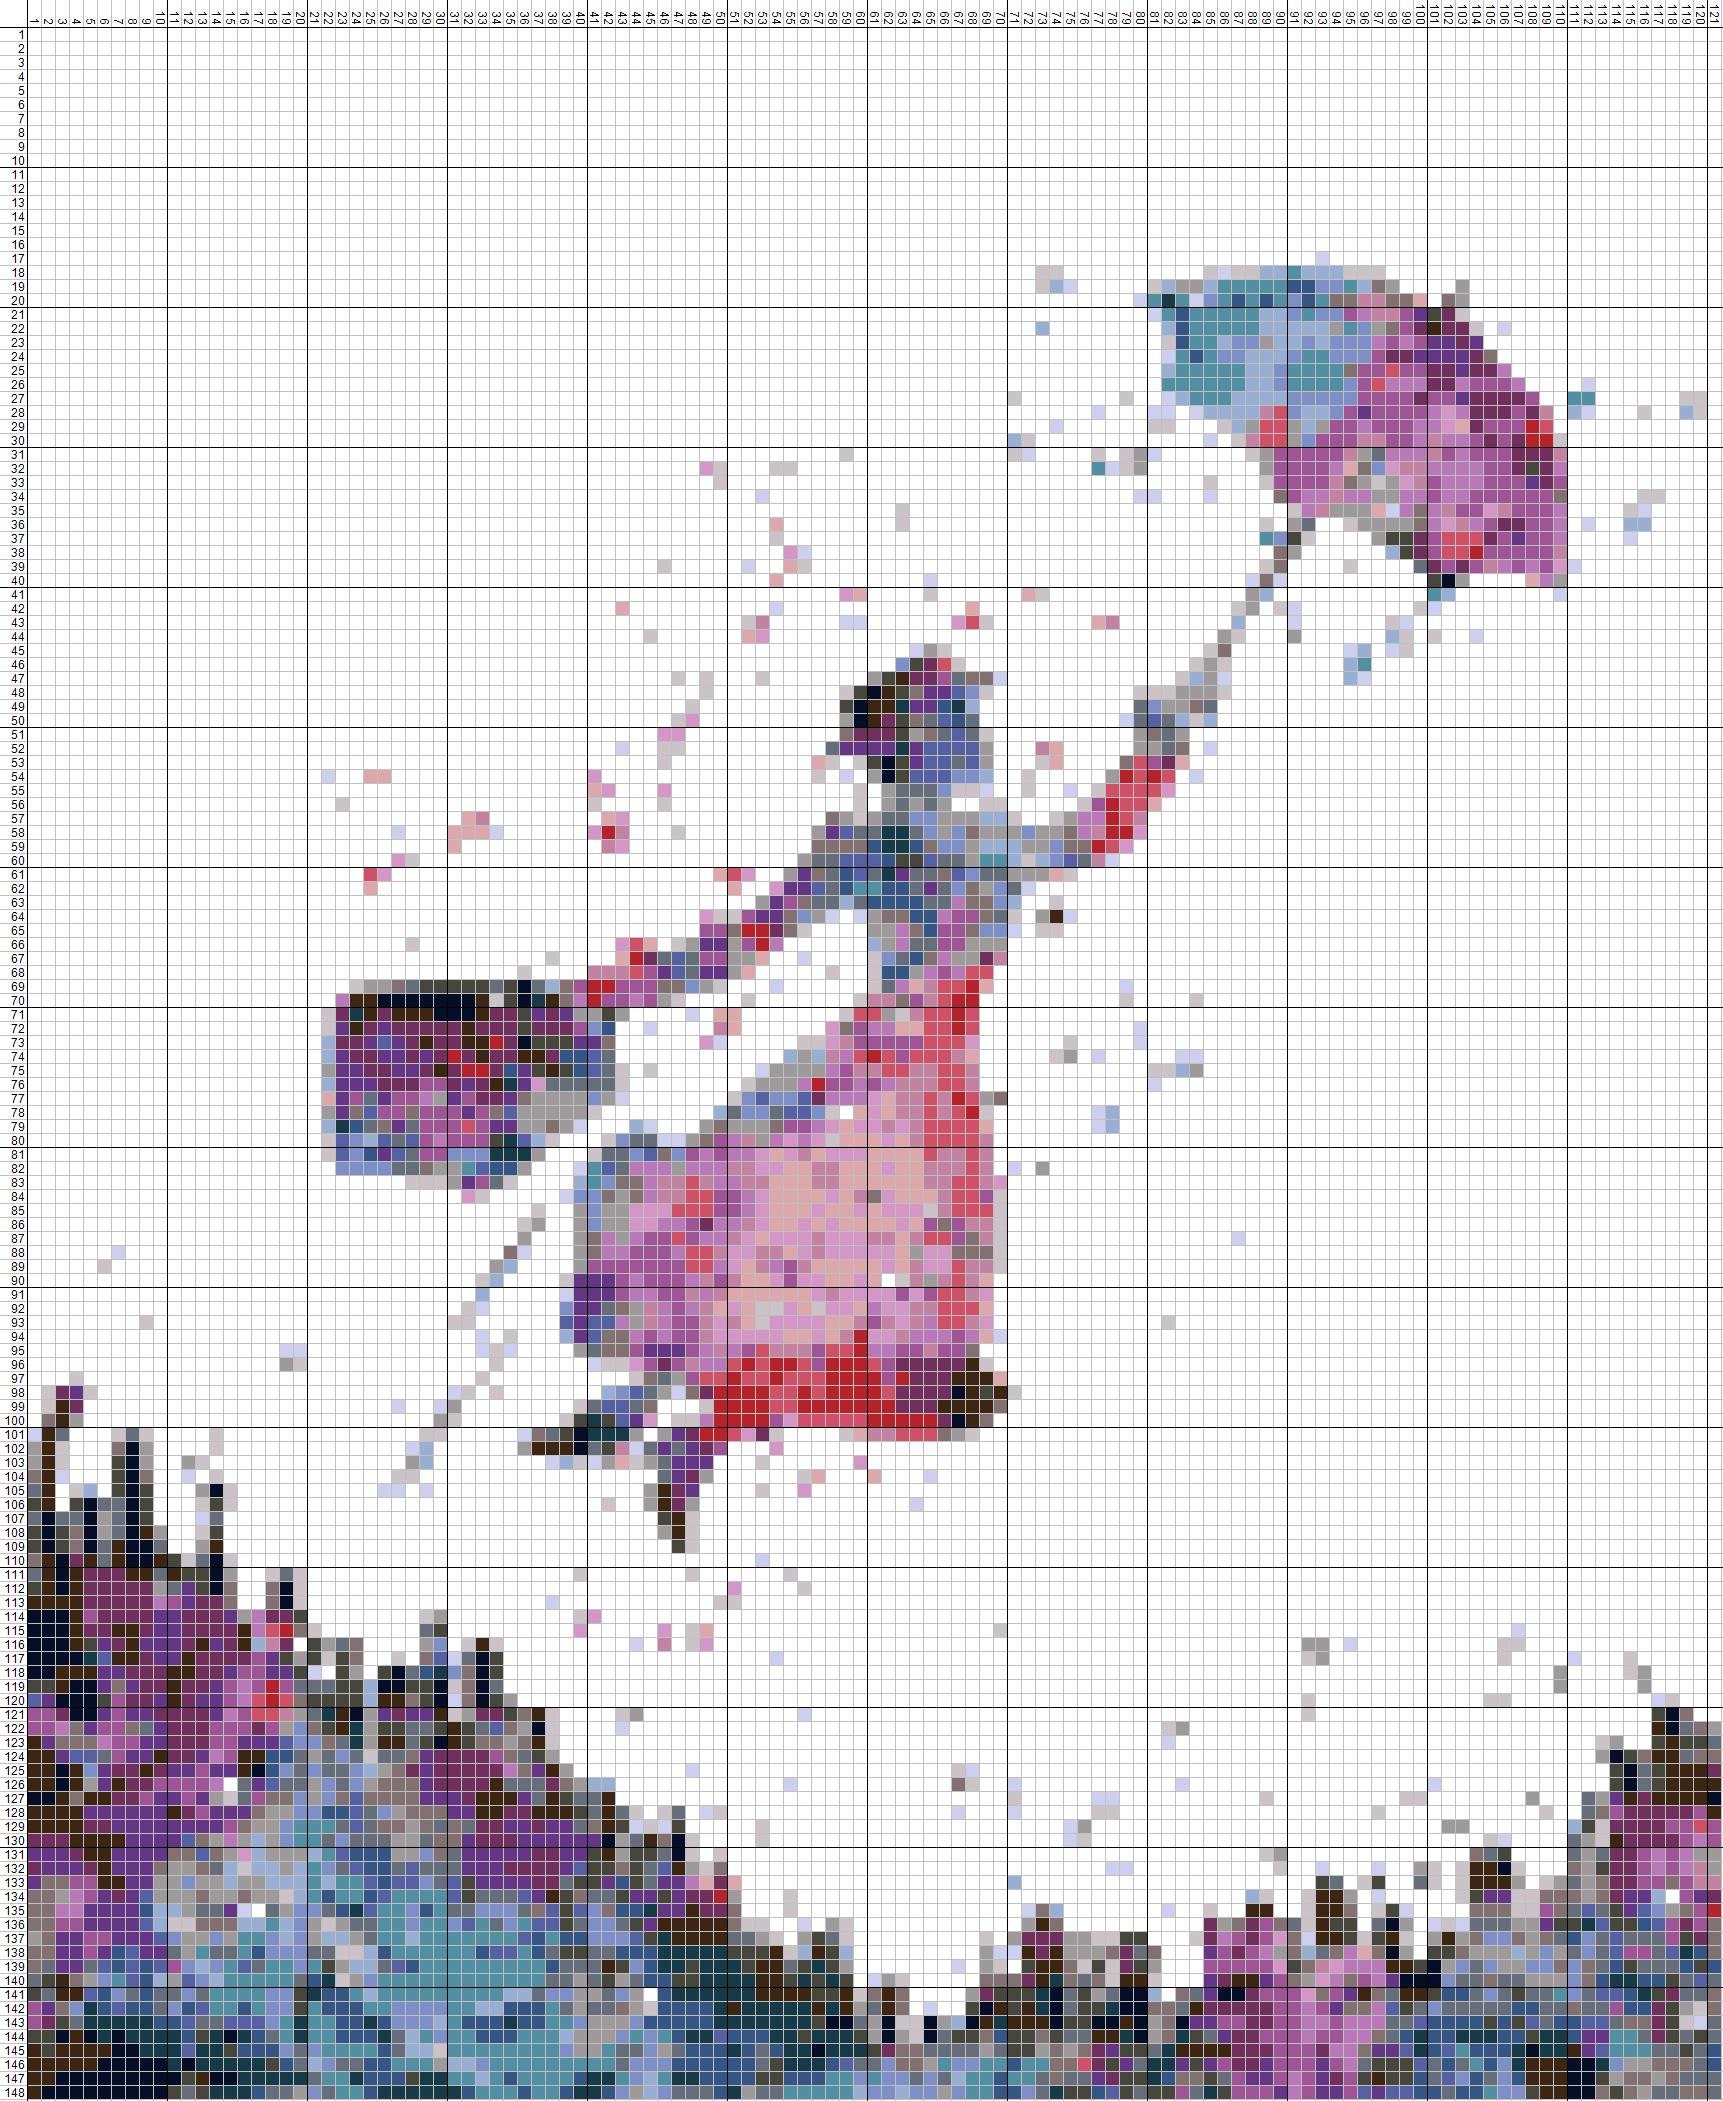 Christmas Wizard Counted Cross Stitch Kit